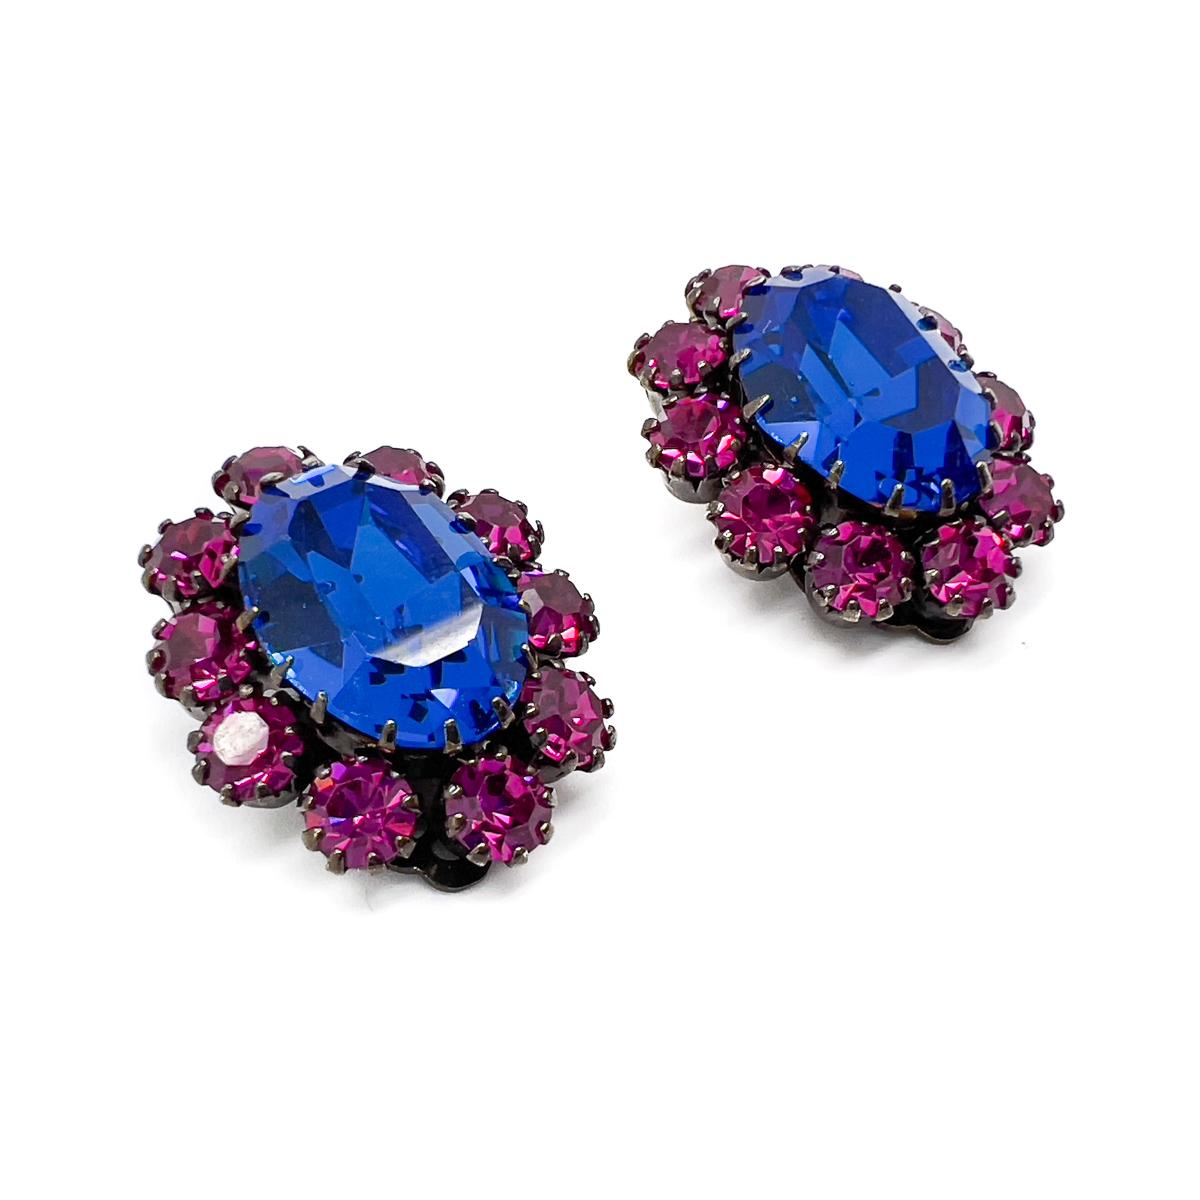 A stunning pair of mid-century Vintage Electric Blue Earrings. The large electric blue crystal sitting within a wonderfully contrasting gallery of hot pink crystals. Each stone claw set to perfection in this timeless cluster style. An adorable